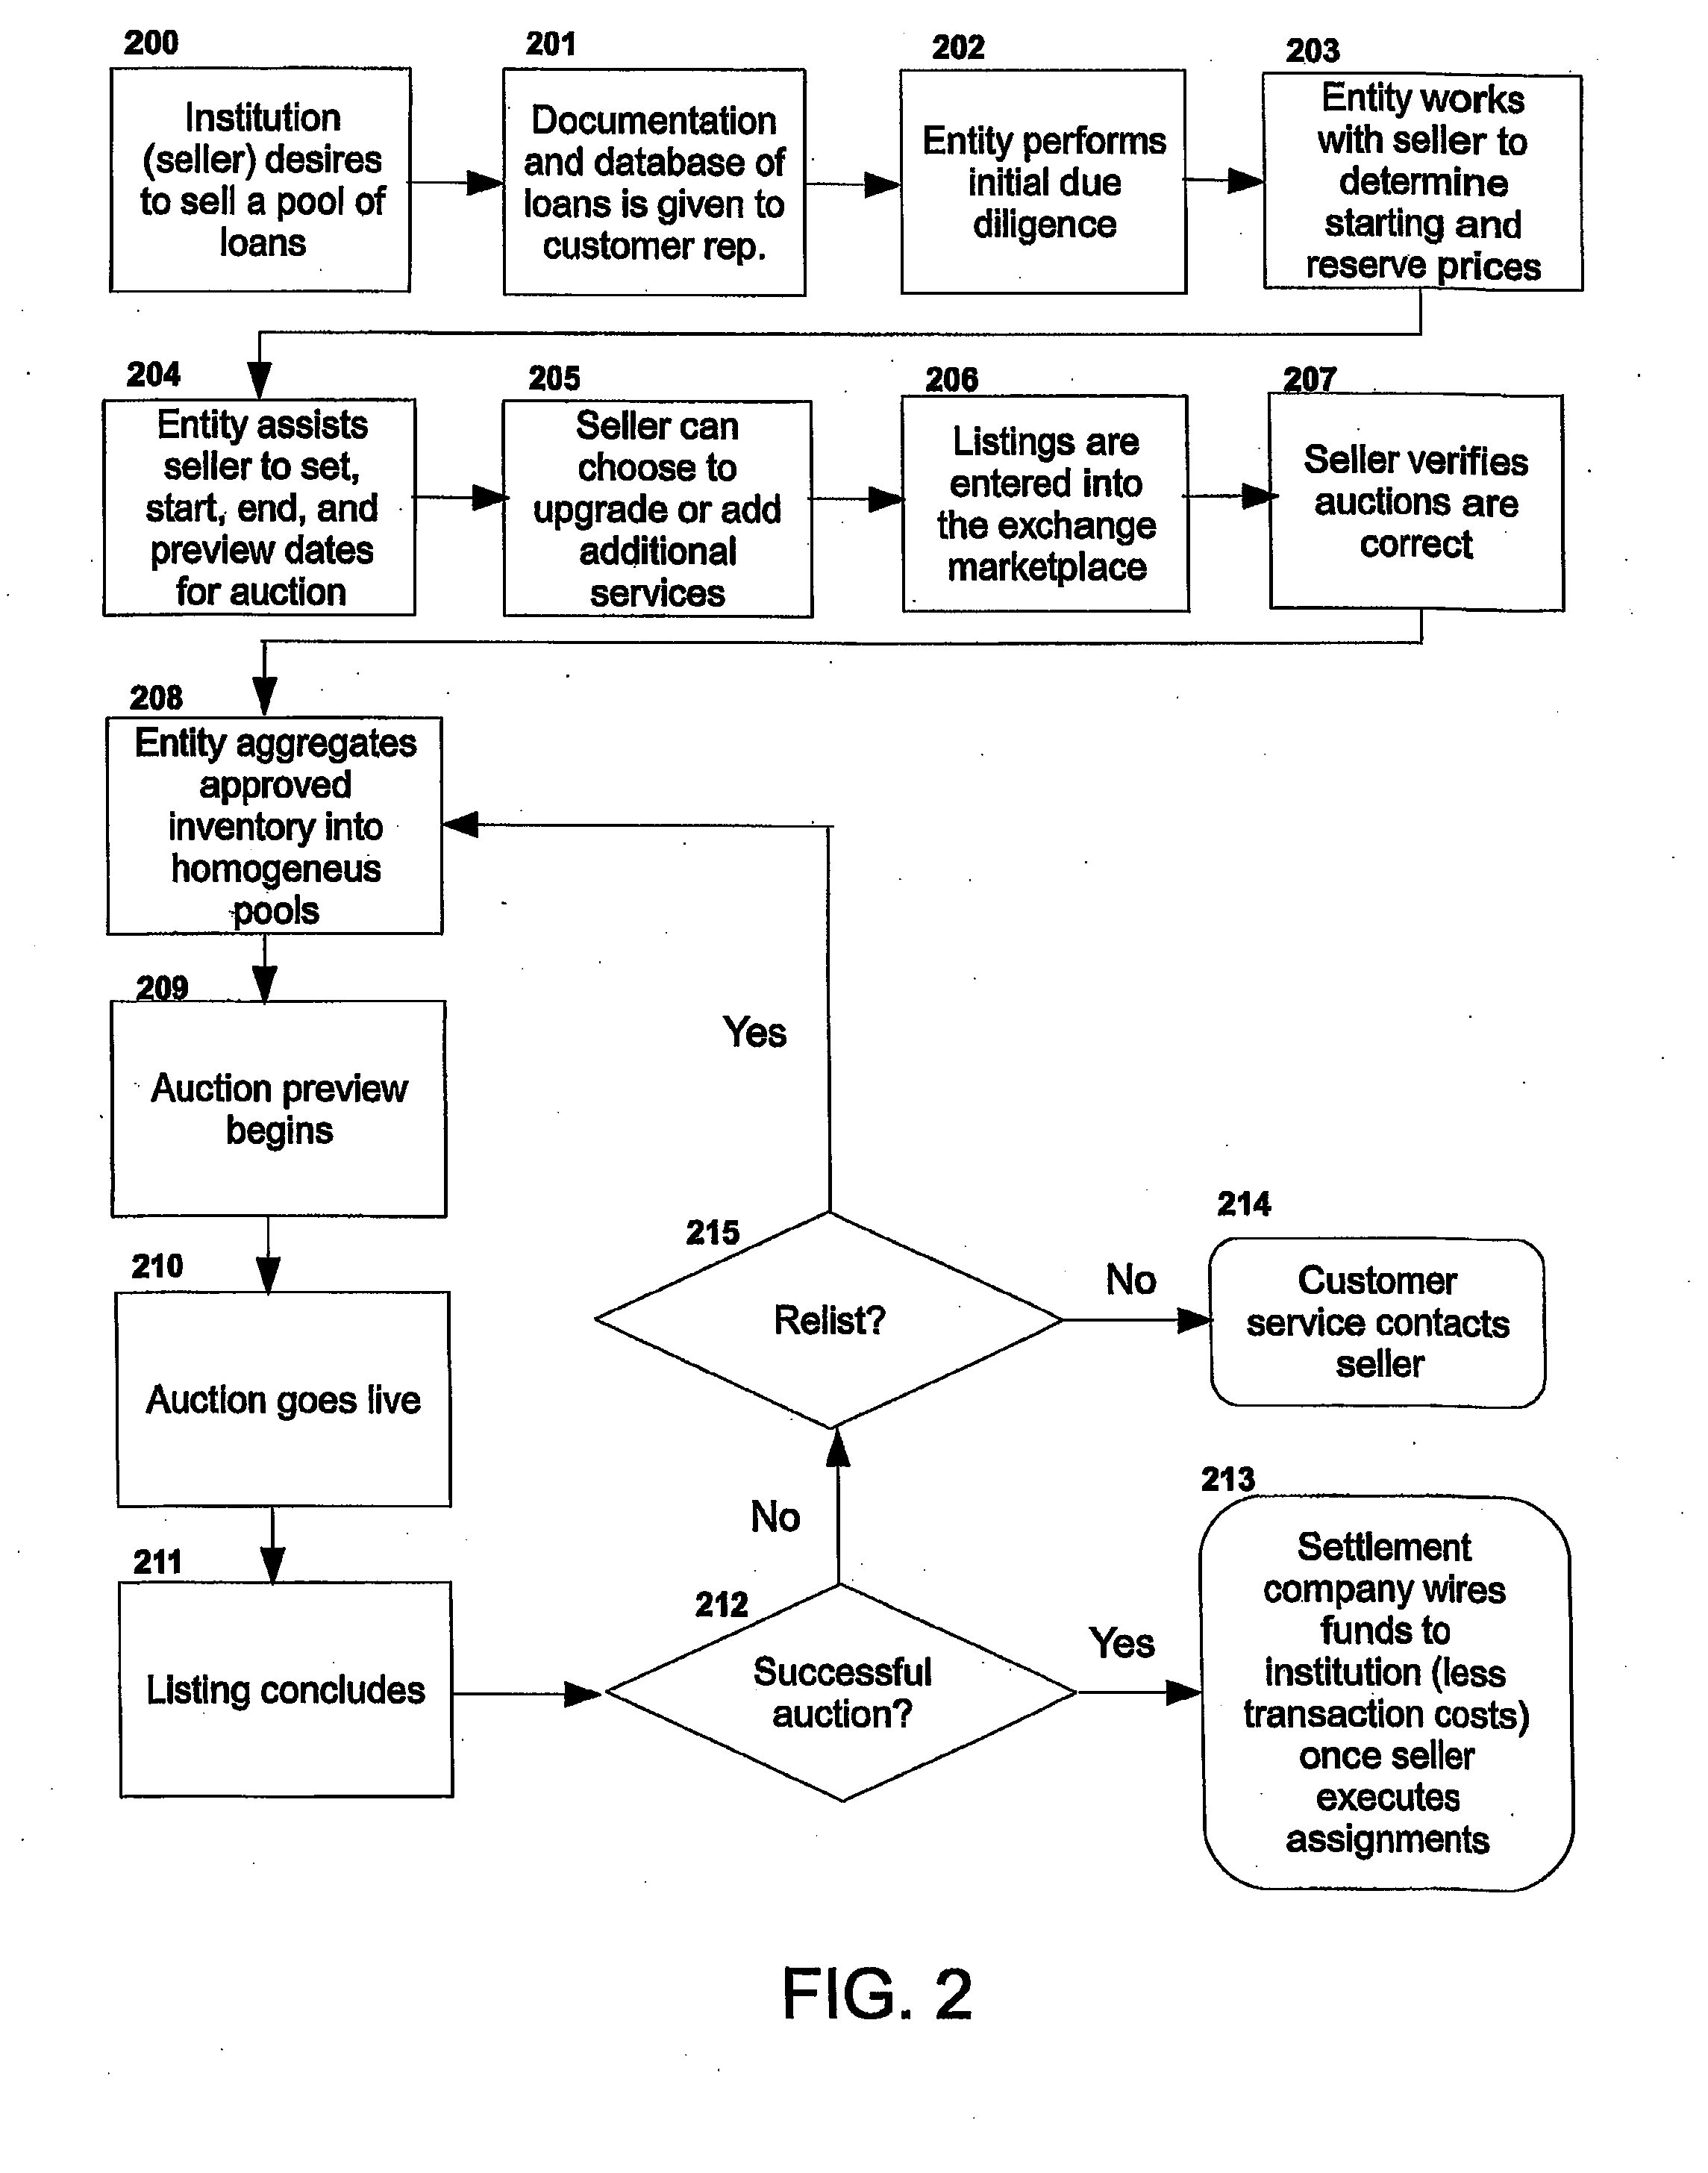 System and Method of Electronic Exchange for Residential Mortgages